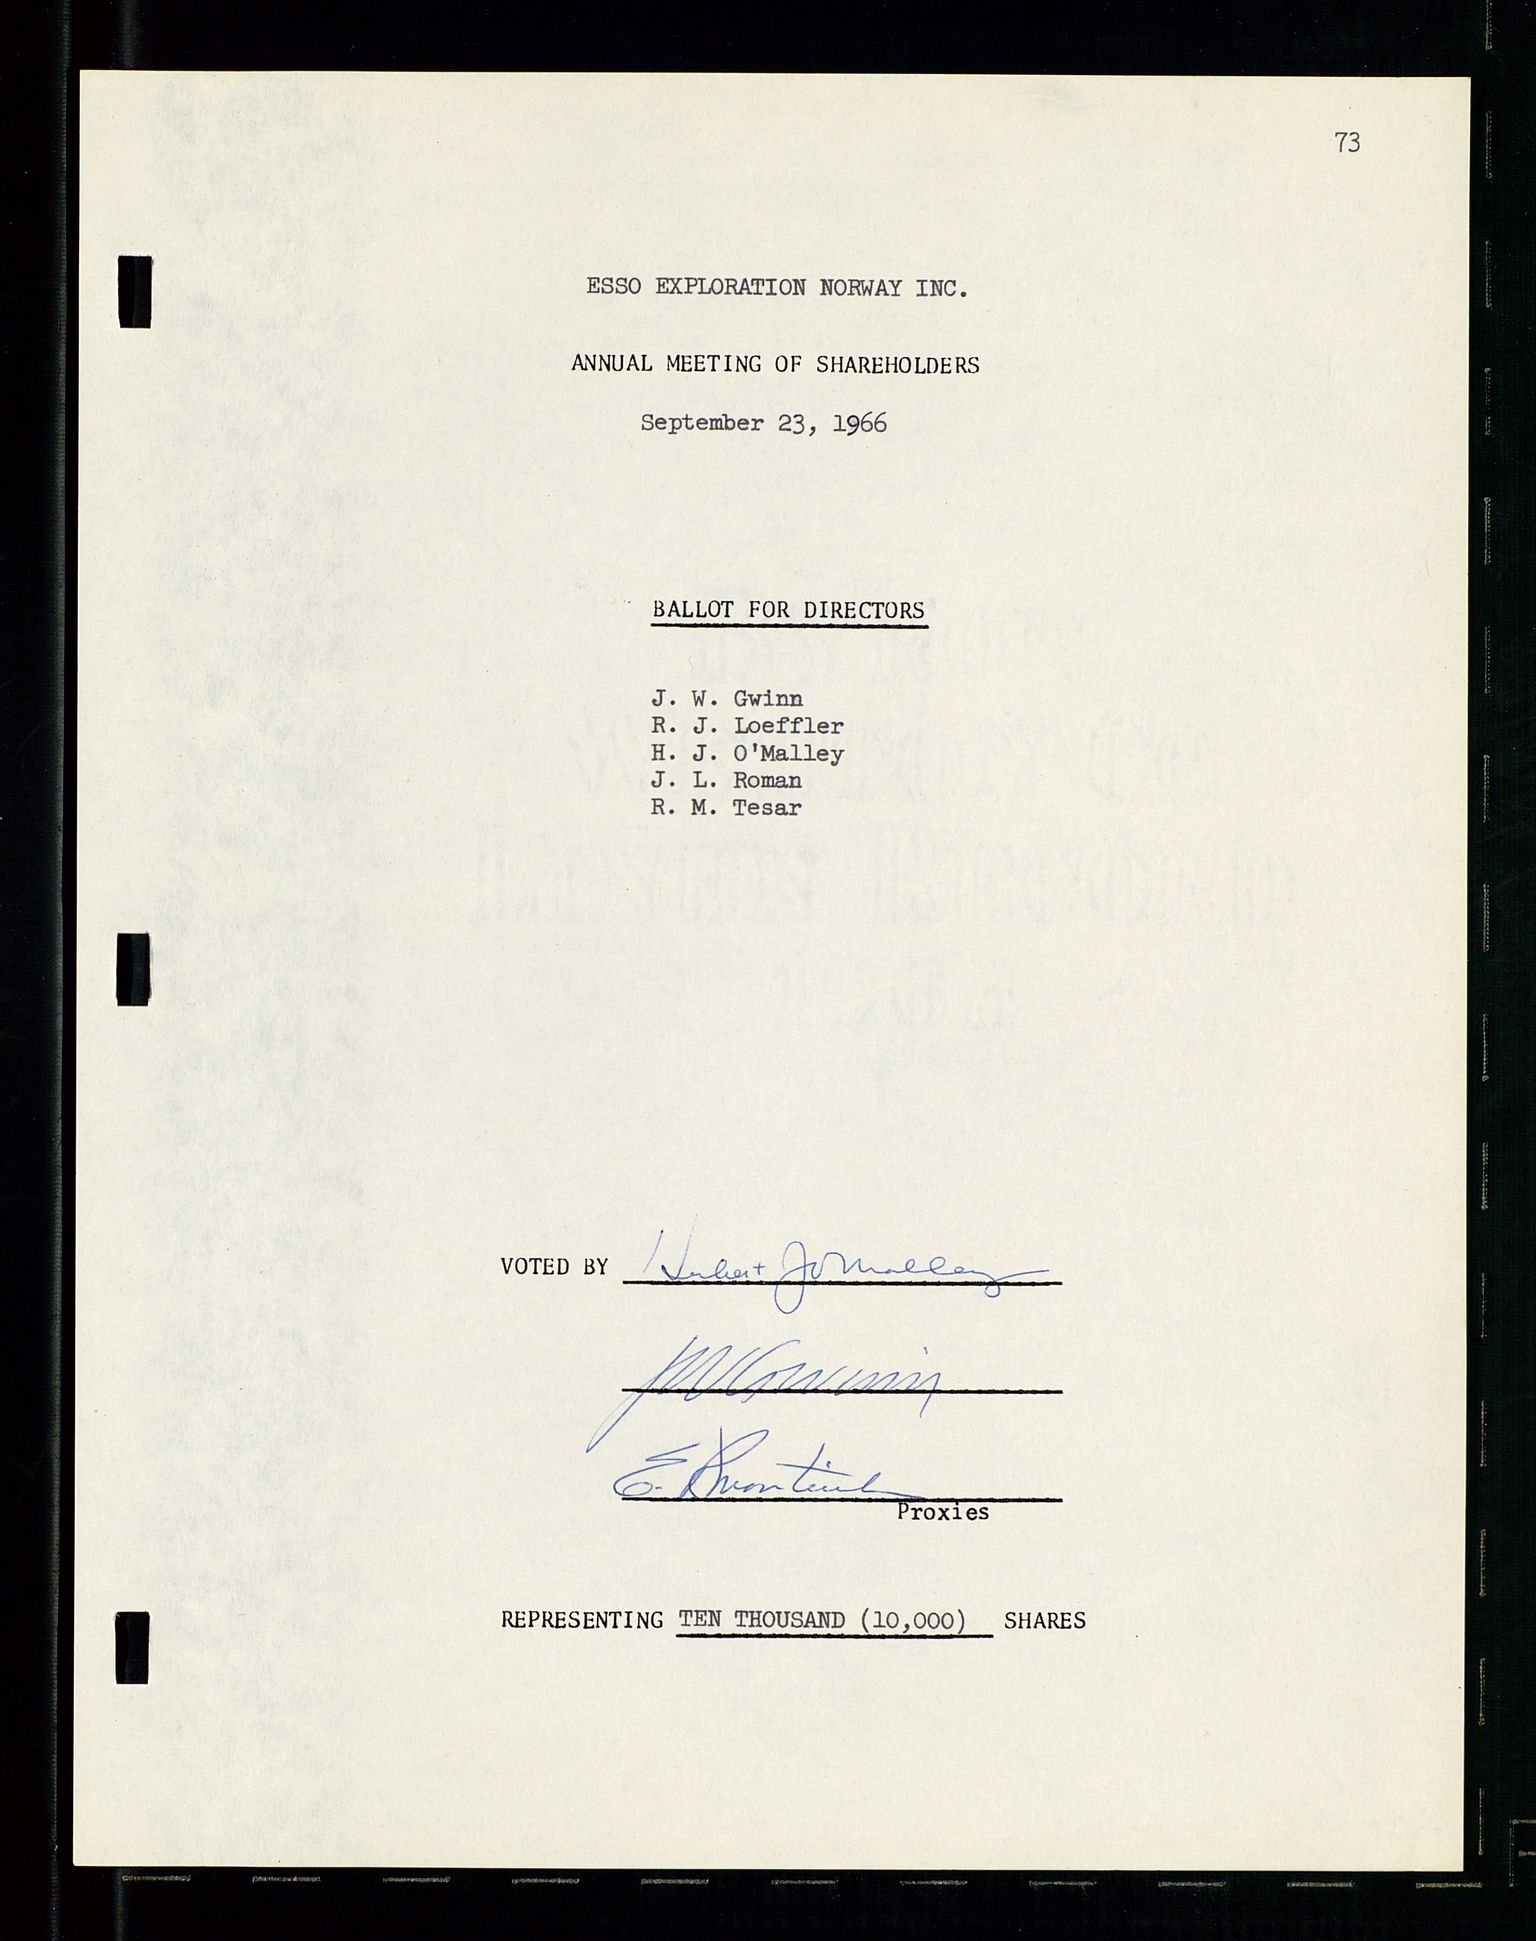 Pa 1512 - Esso Exploration and Production Norway Inc., SAST/A-101917/A/Aa/L0001/0001: Styredokumenter / Corporate records, By-Laws, Board meeting minutes, Incorporations, 1965-1975, s. 73